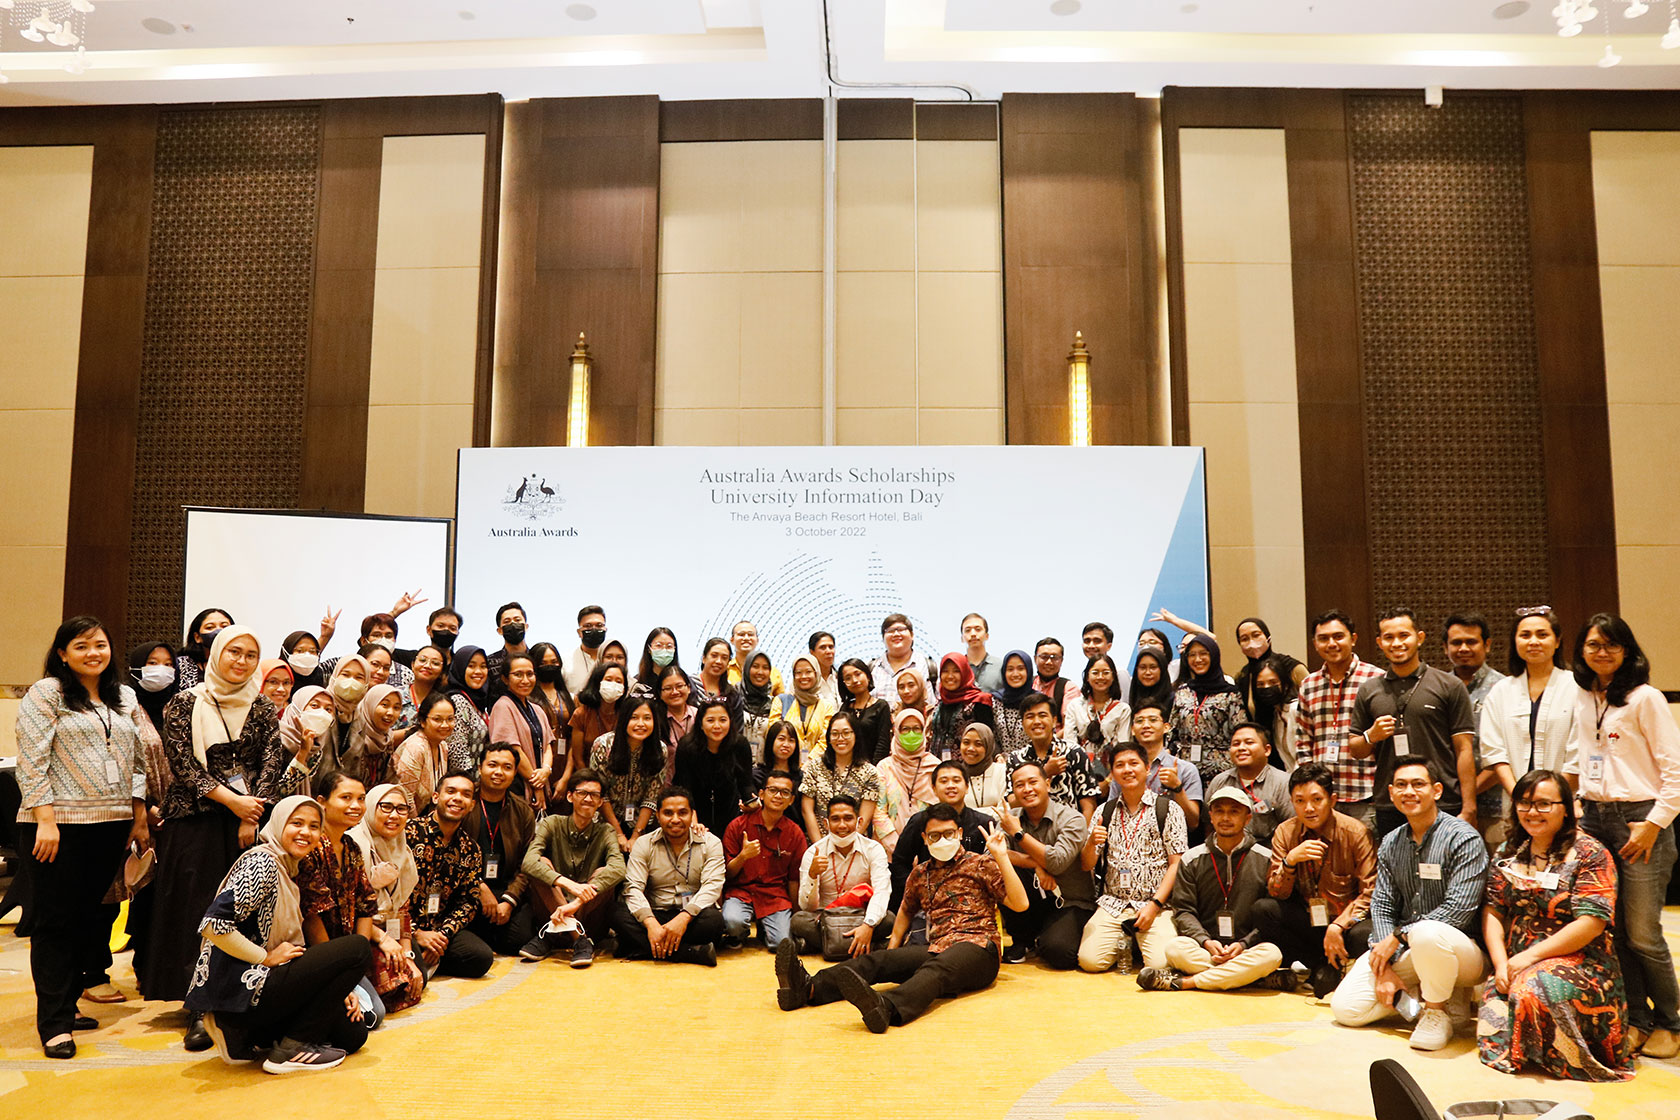 All scholars take a picture together in one frame in the venue hall, with the Australia Awards Scholarships University Information Day’s backdrop in the background.